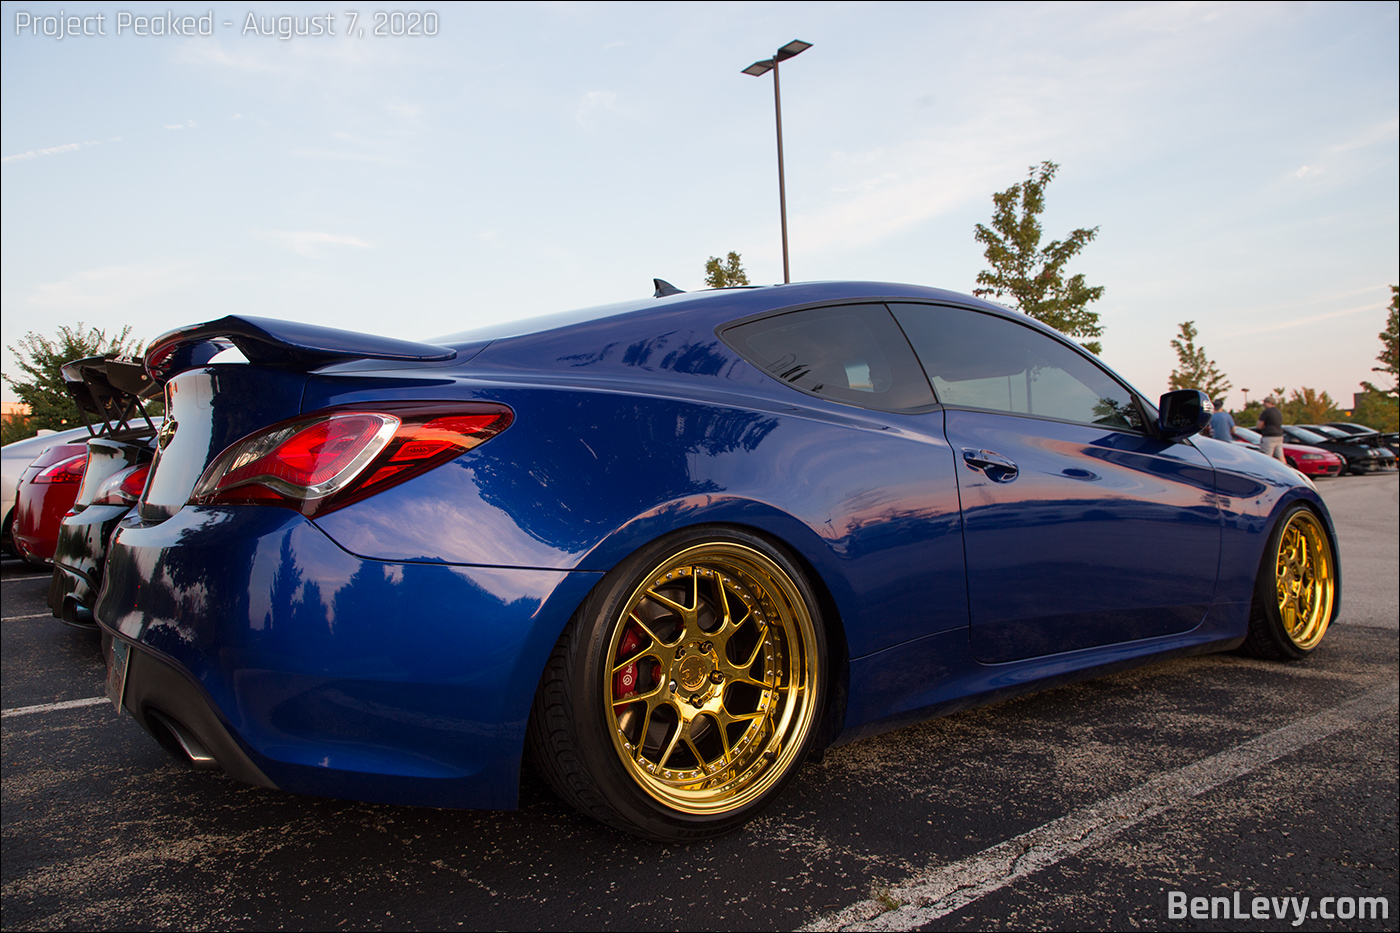 Blue Genesis Coupe with Aodhan DS01 Wheels in Gold